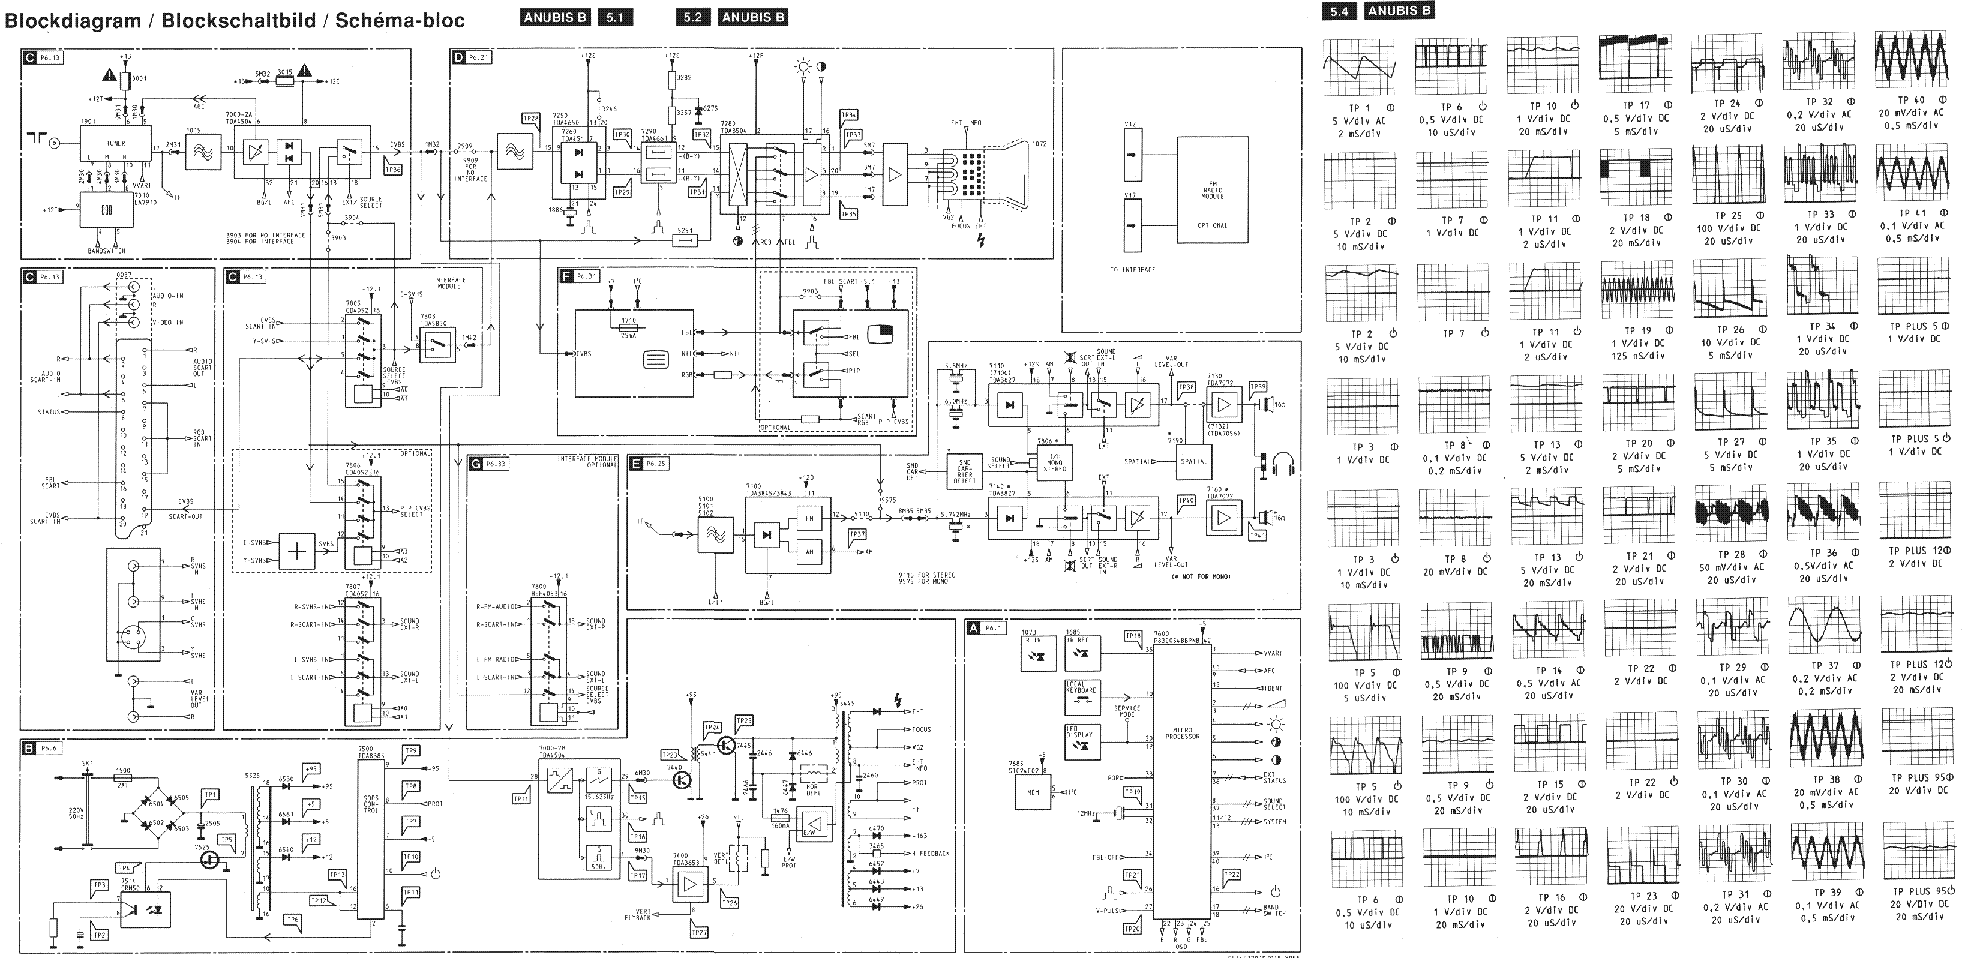 PHILIPS CHASSIS ANUBIS B AB service manual (2nd page)